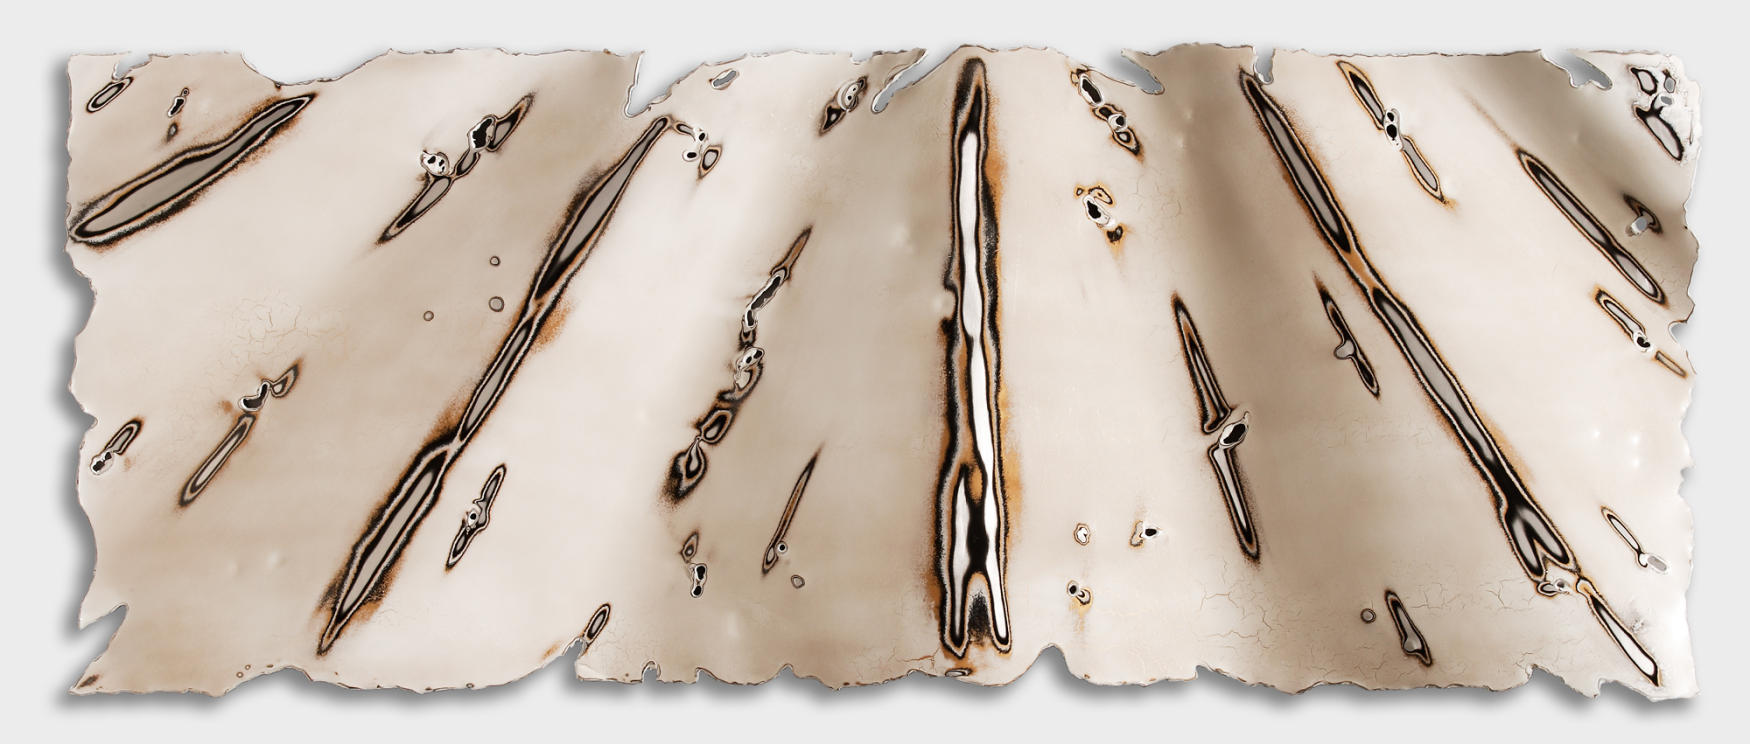 24"x60" Layered Lacquer on Distressed Aluminum